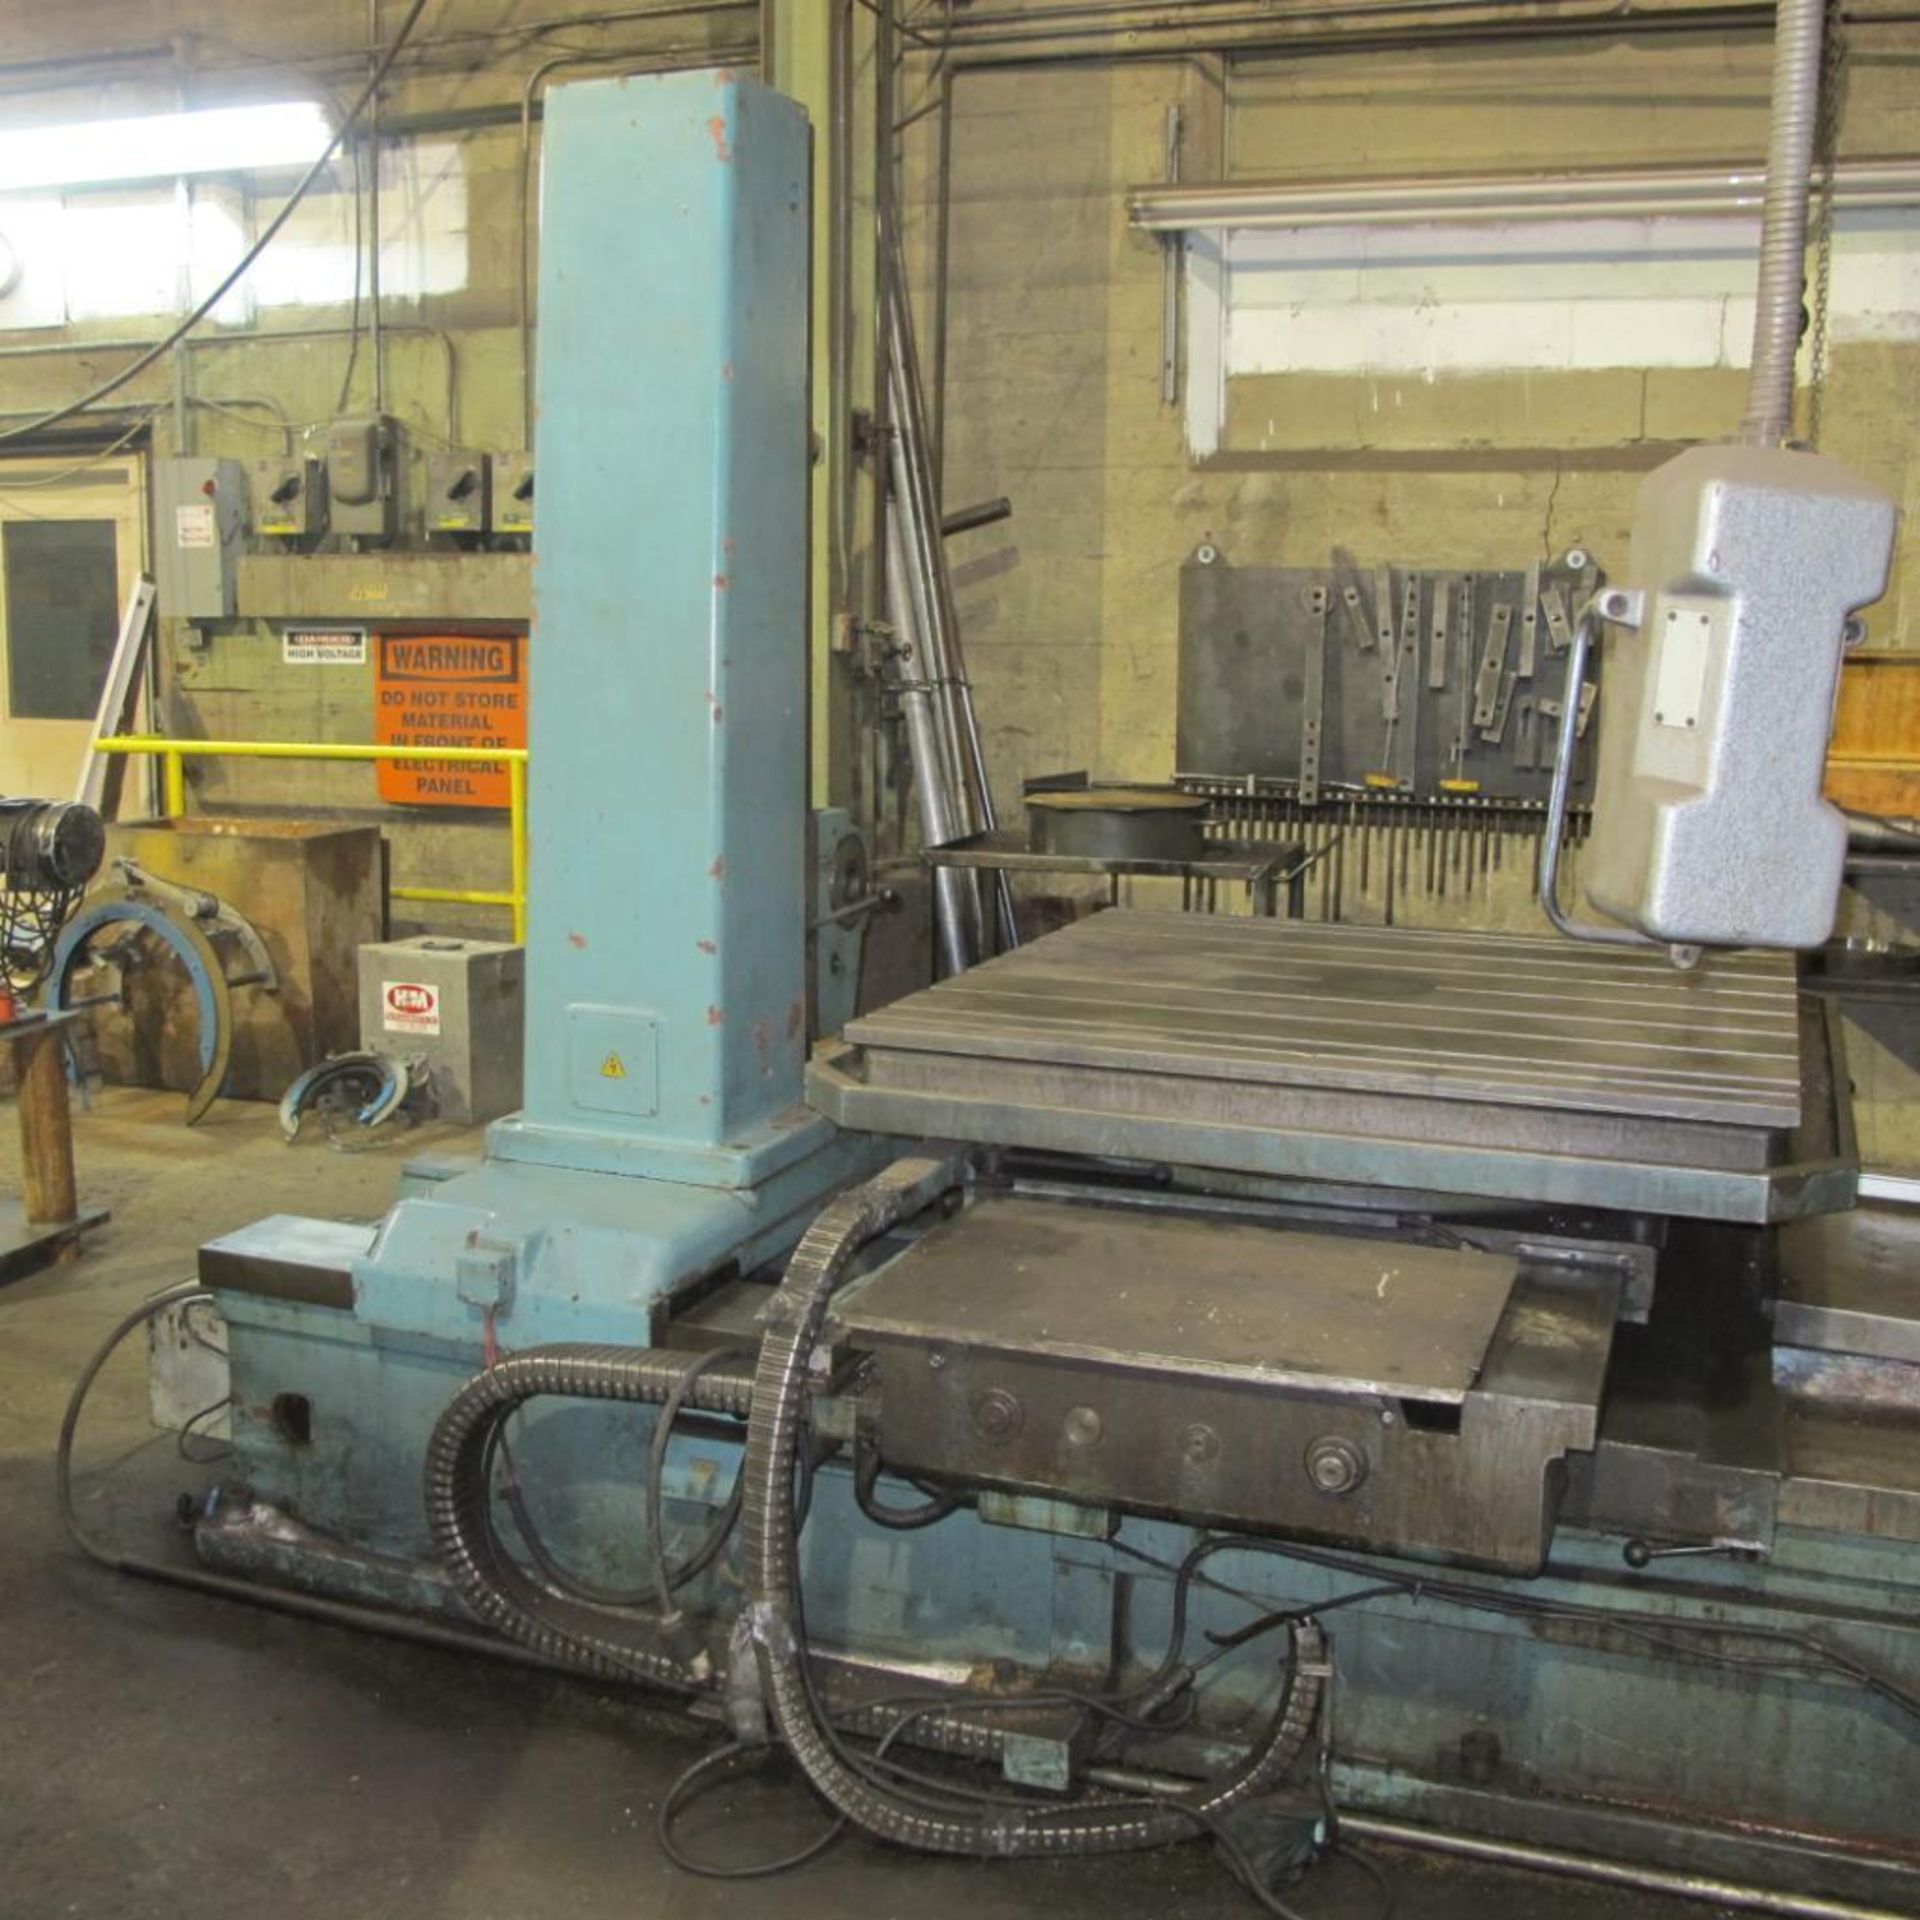 TOS HORIZONTAL BORING MILL MODEL W100A, 4" HEAD, 49" TABLE, TAILSTOCK, HEIDENHAIN 4 AXIS DRO, S/N 30 - Image 7 of 23